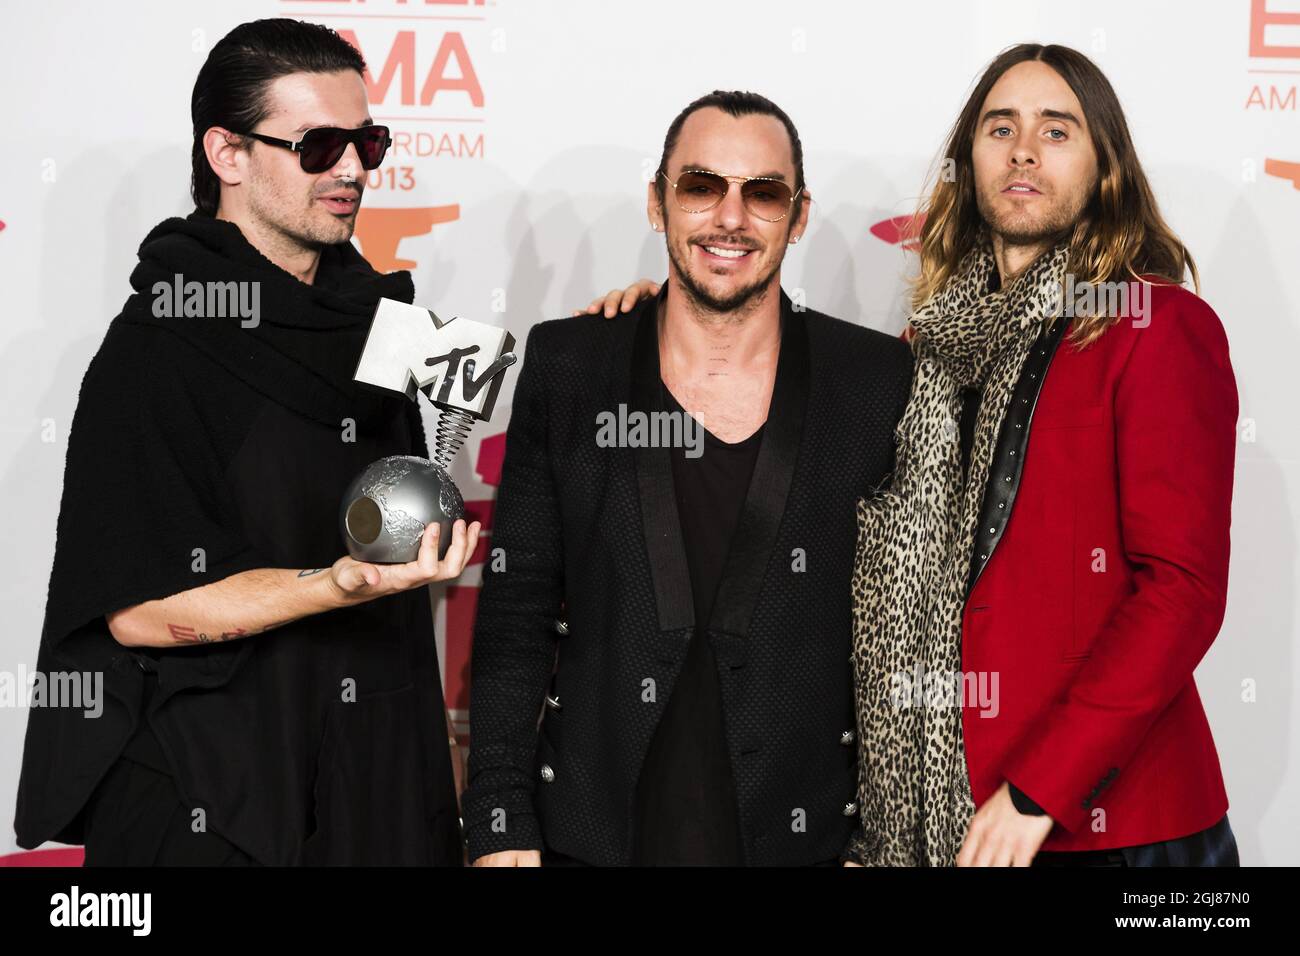 AMSTERDAM 20131110 Members of US rock band Thirty seconds to Mars (from LtoR) Tomo Milicevic, Shannon Leto and Jared Leto pose with their award during the 2013 MTV Europe Music Awards held at the Ziggo Dome in Amsterdam, Netherlands, Sunday November 10, 2013. Foto: Vilhelm Stokstad / TT / Kod 11370  Stock Photo